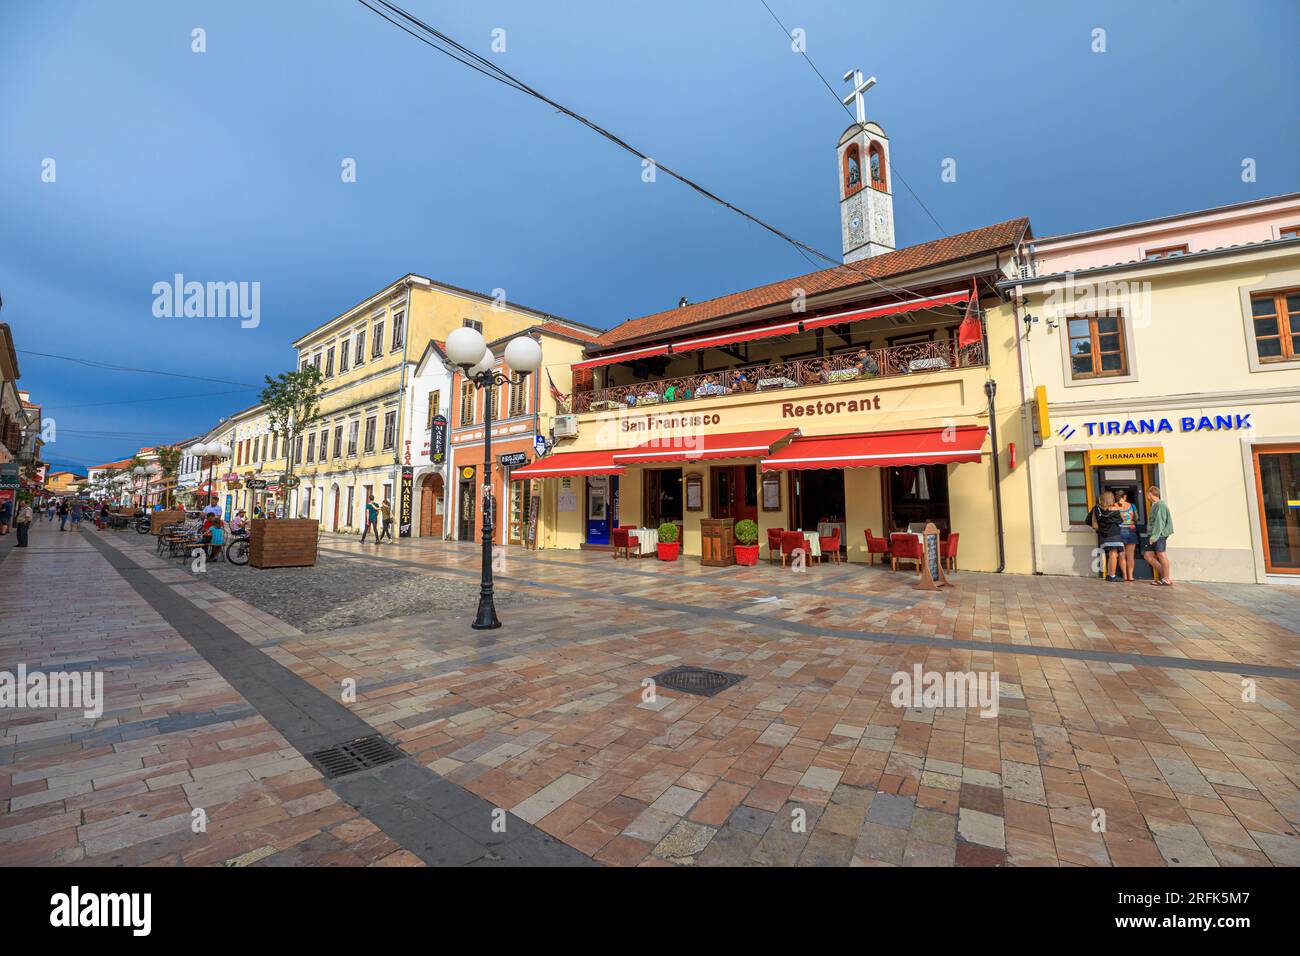 Shkoder, Albania - May 1, 2023: Shkoder, also known as Shkodra, is a historic town located in northwestern Albania. It is one of the oldest and most Stock Photo